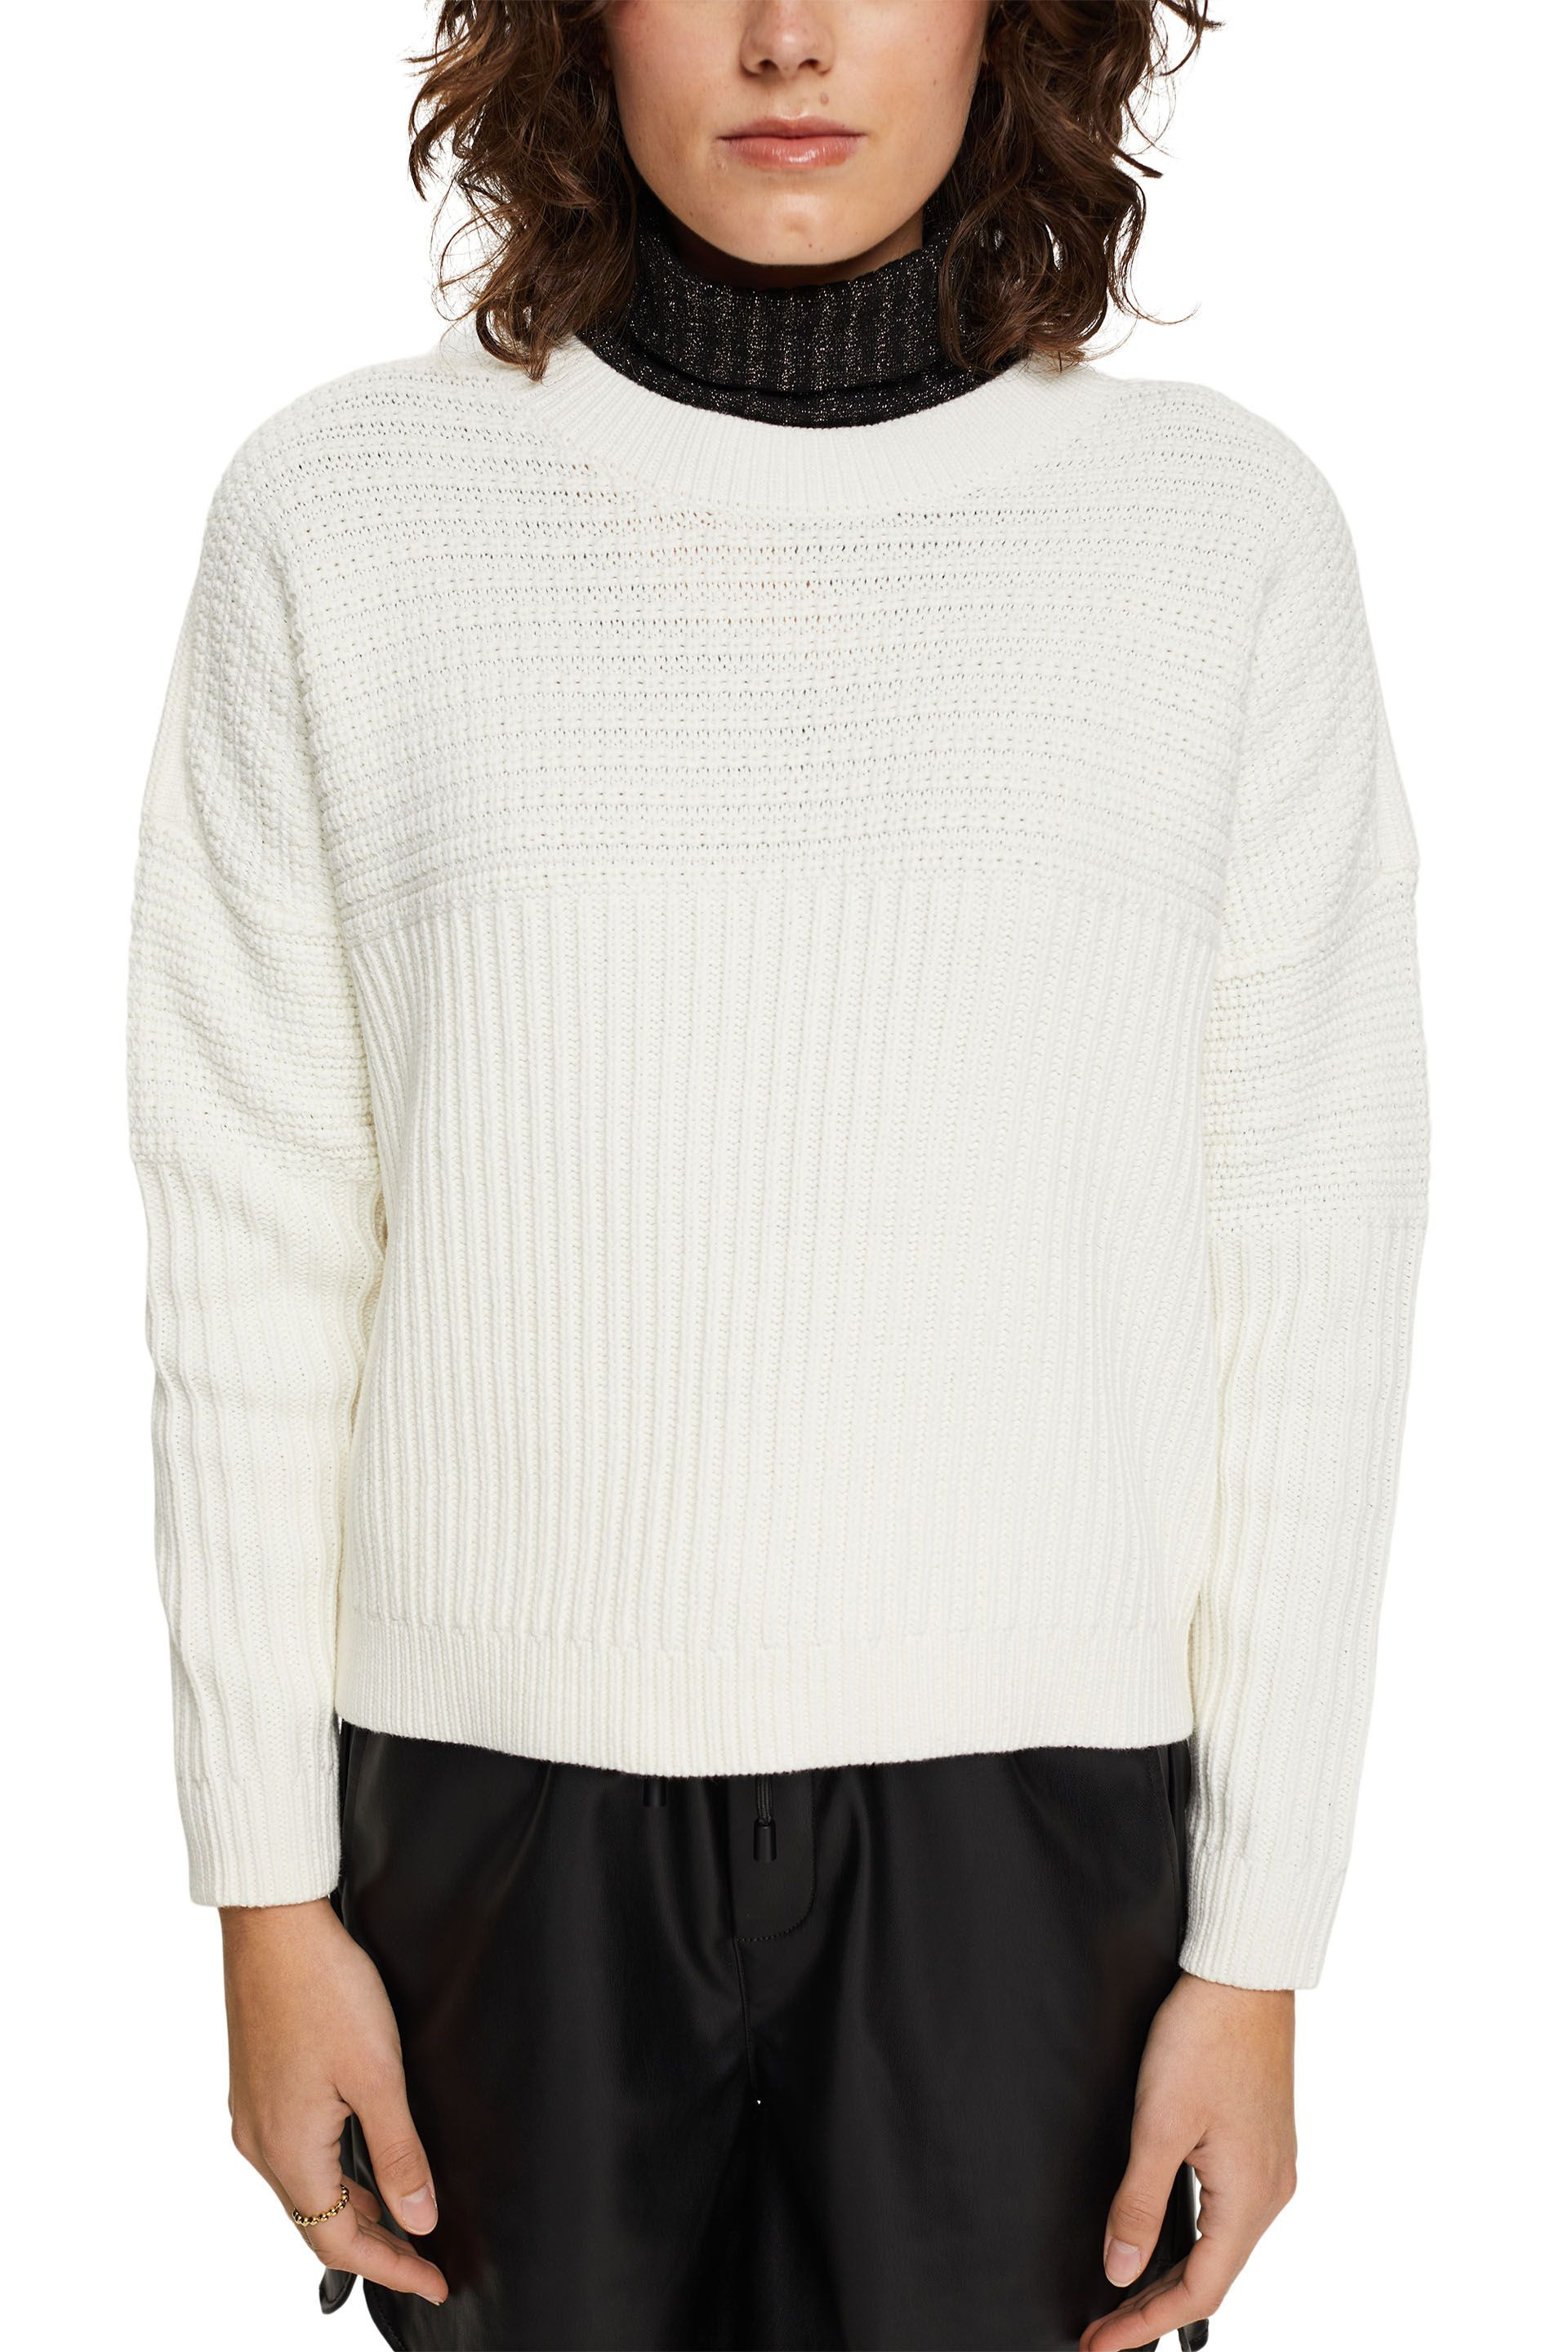 Esprit - Pullover in maglia chunky in misto cotone, Bianco, large image number 1